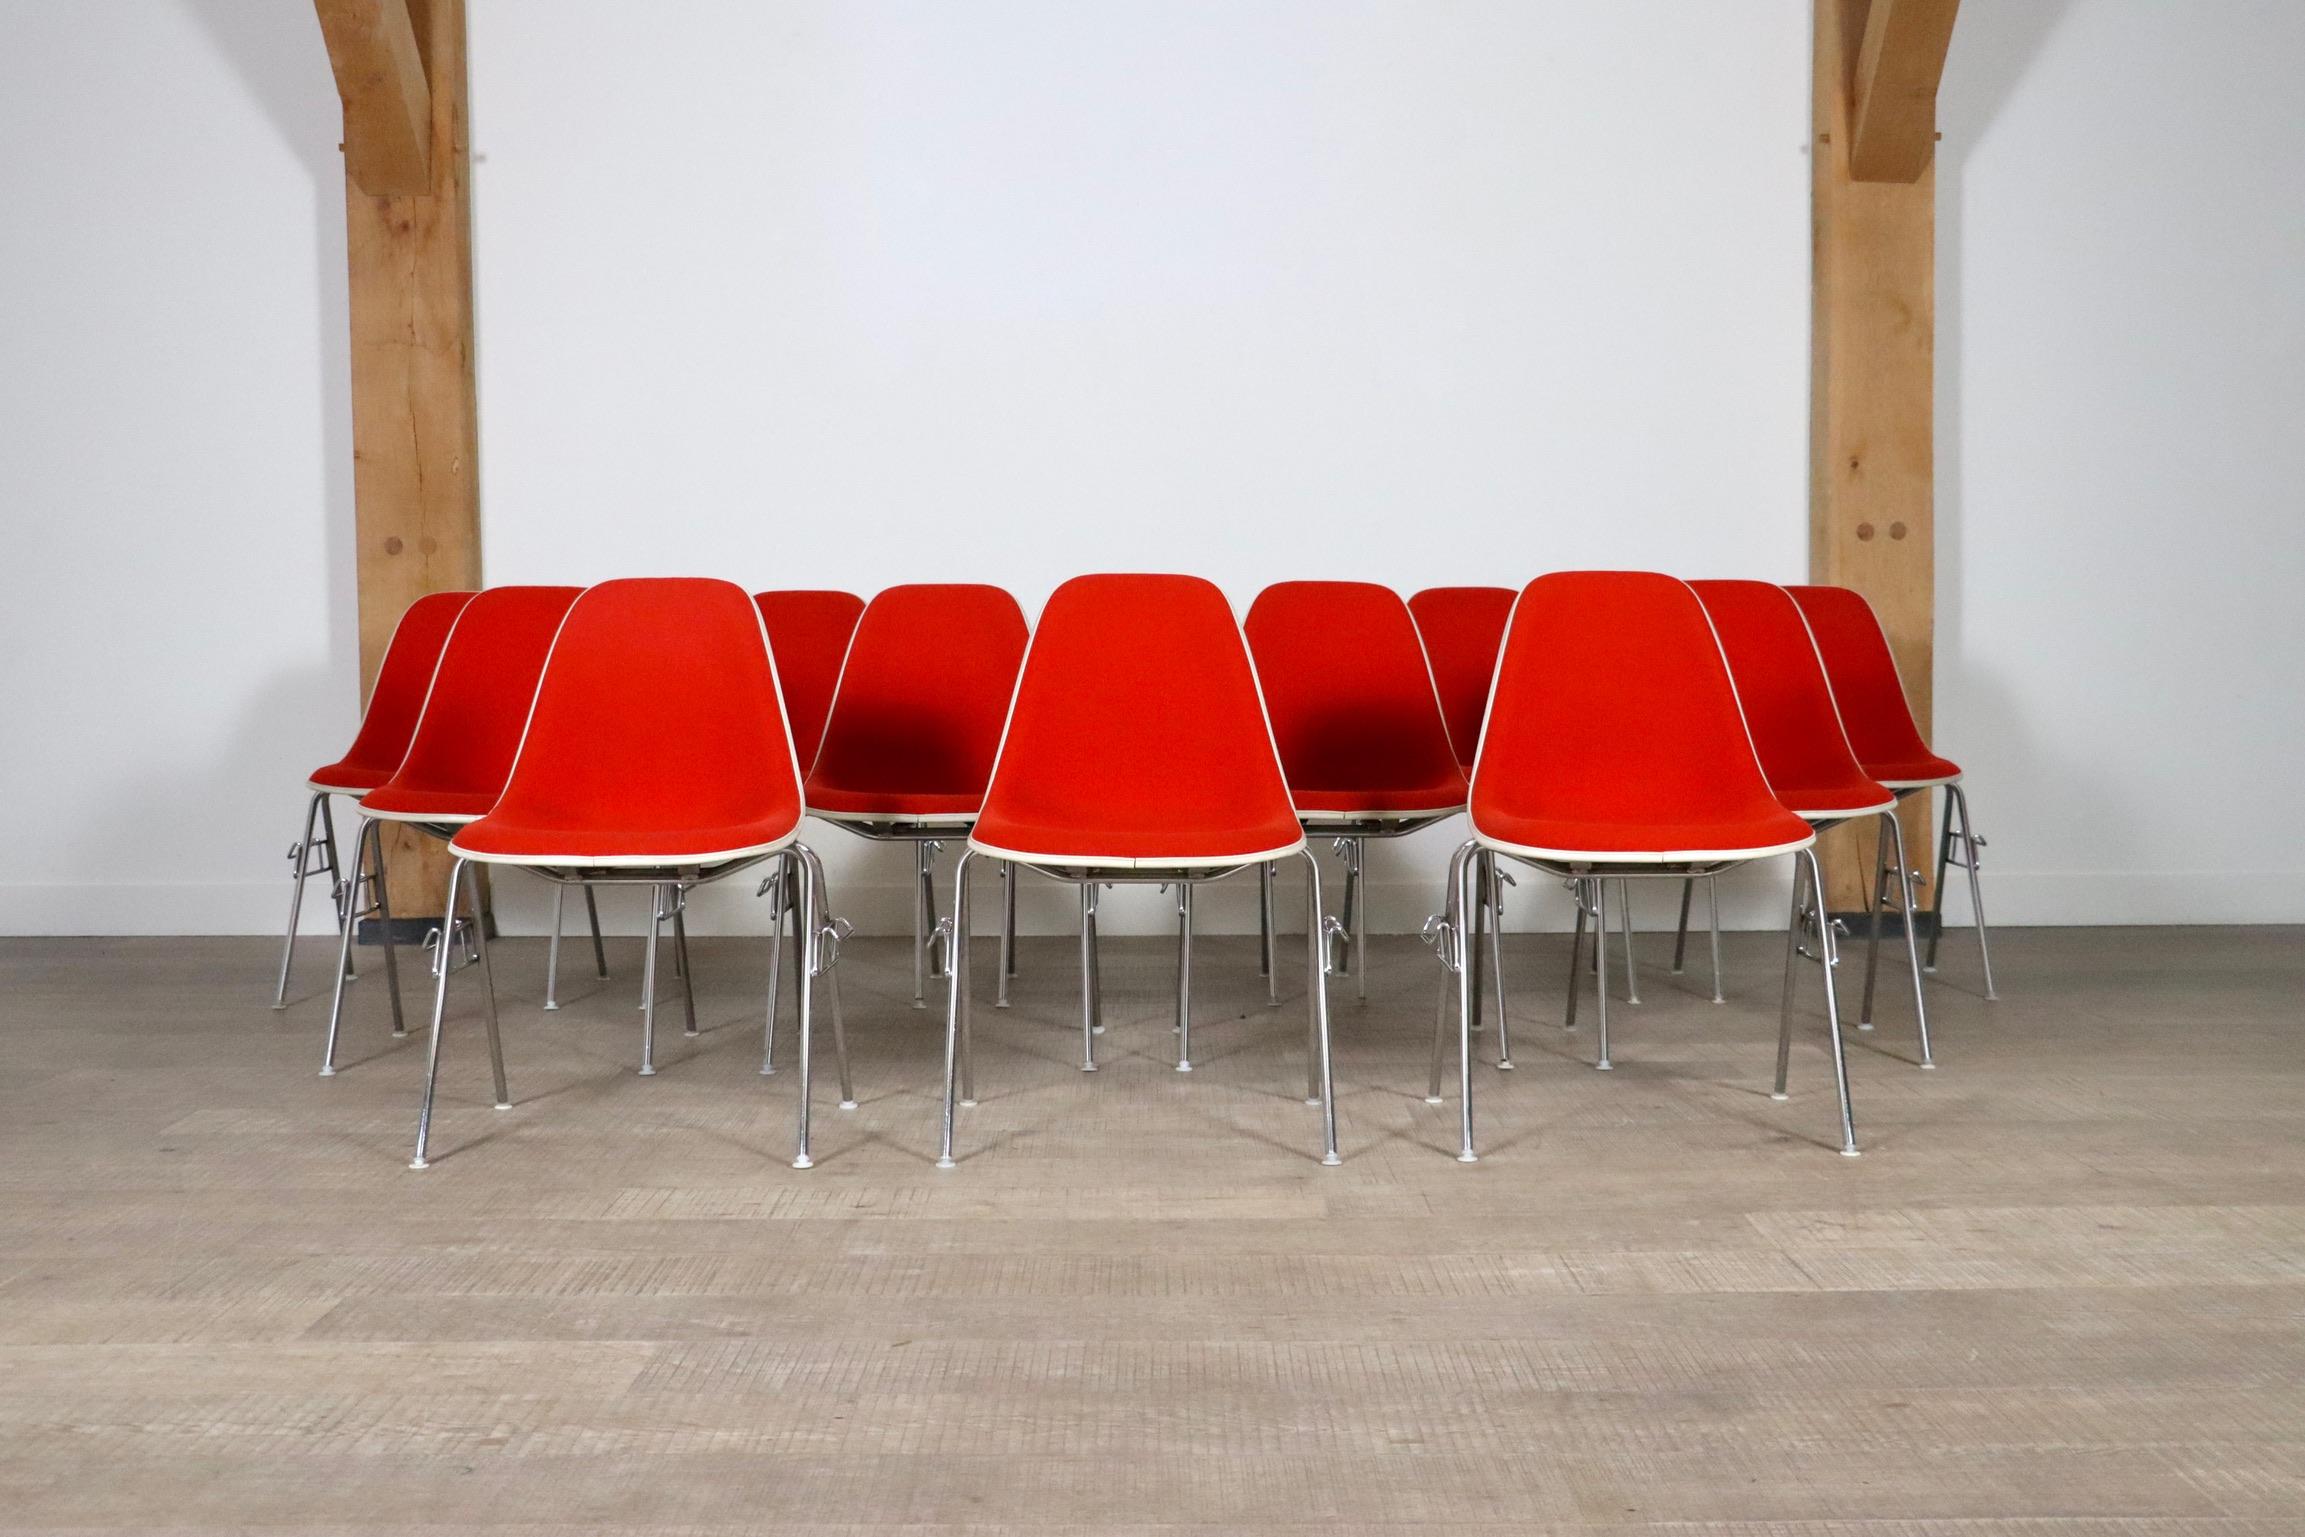 Nice set of 12 stackable chairs model DSS by Charles and Ray Eames for Herman Miller. This set is made from a fiberglass shell and is upholstered in red with a white edge. A nice set which can be easily stacked and stored if needed, making it a nice